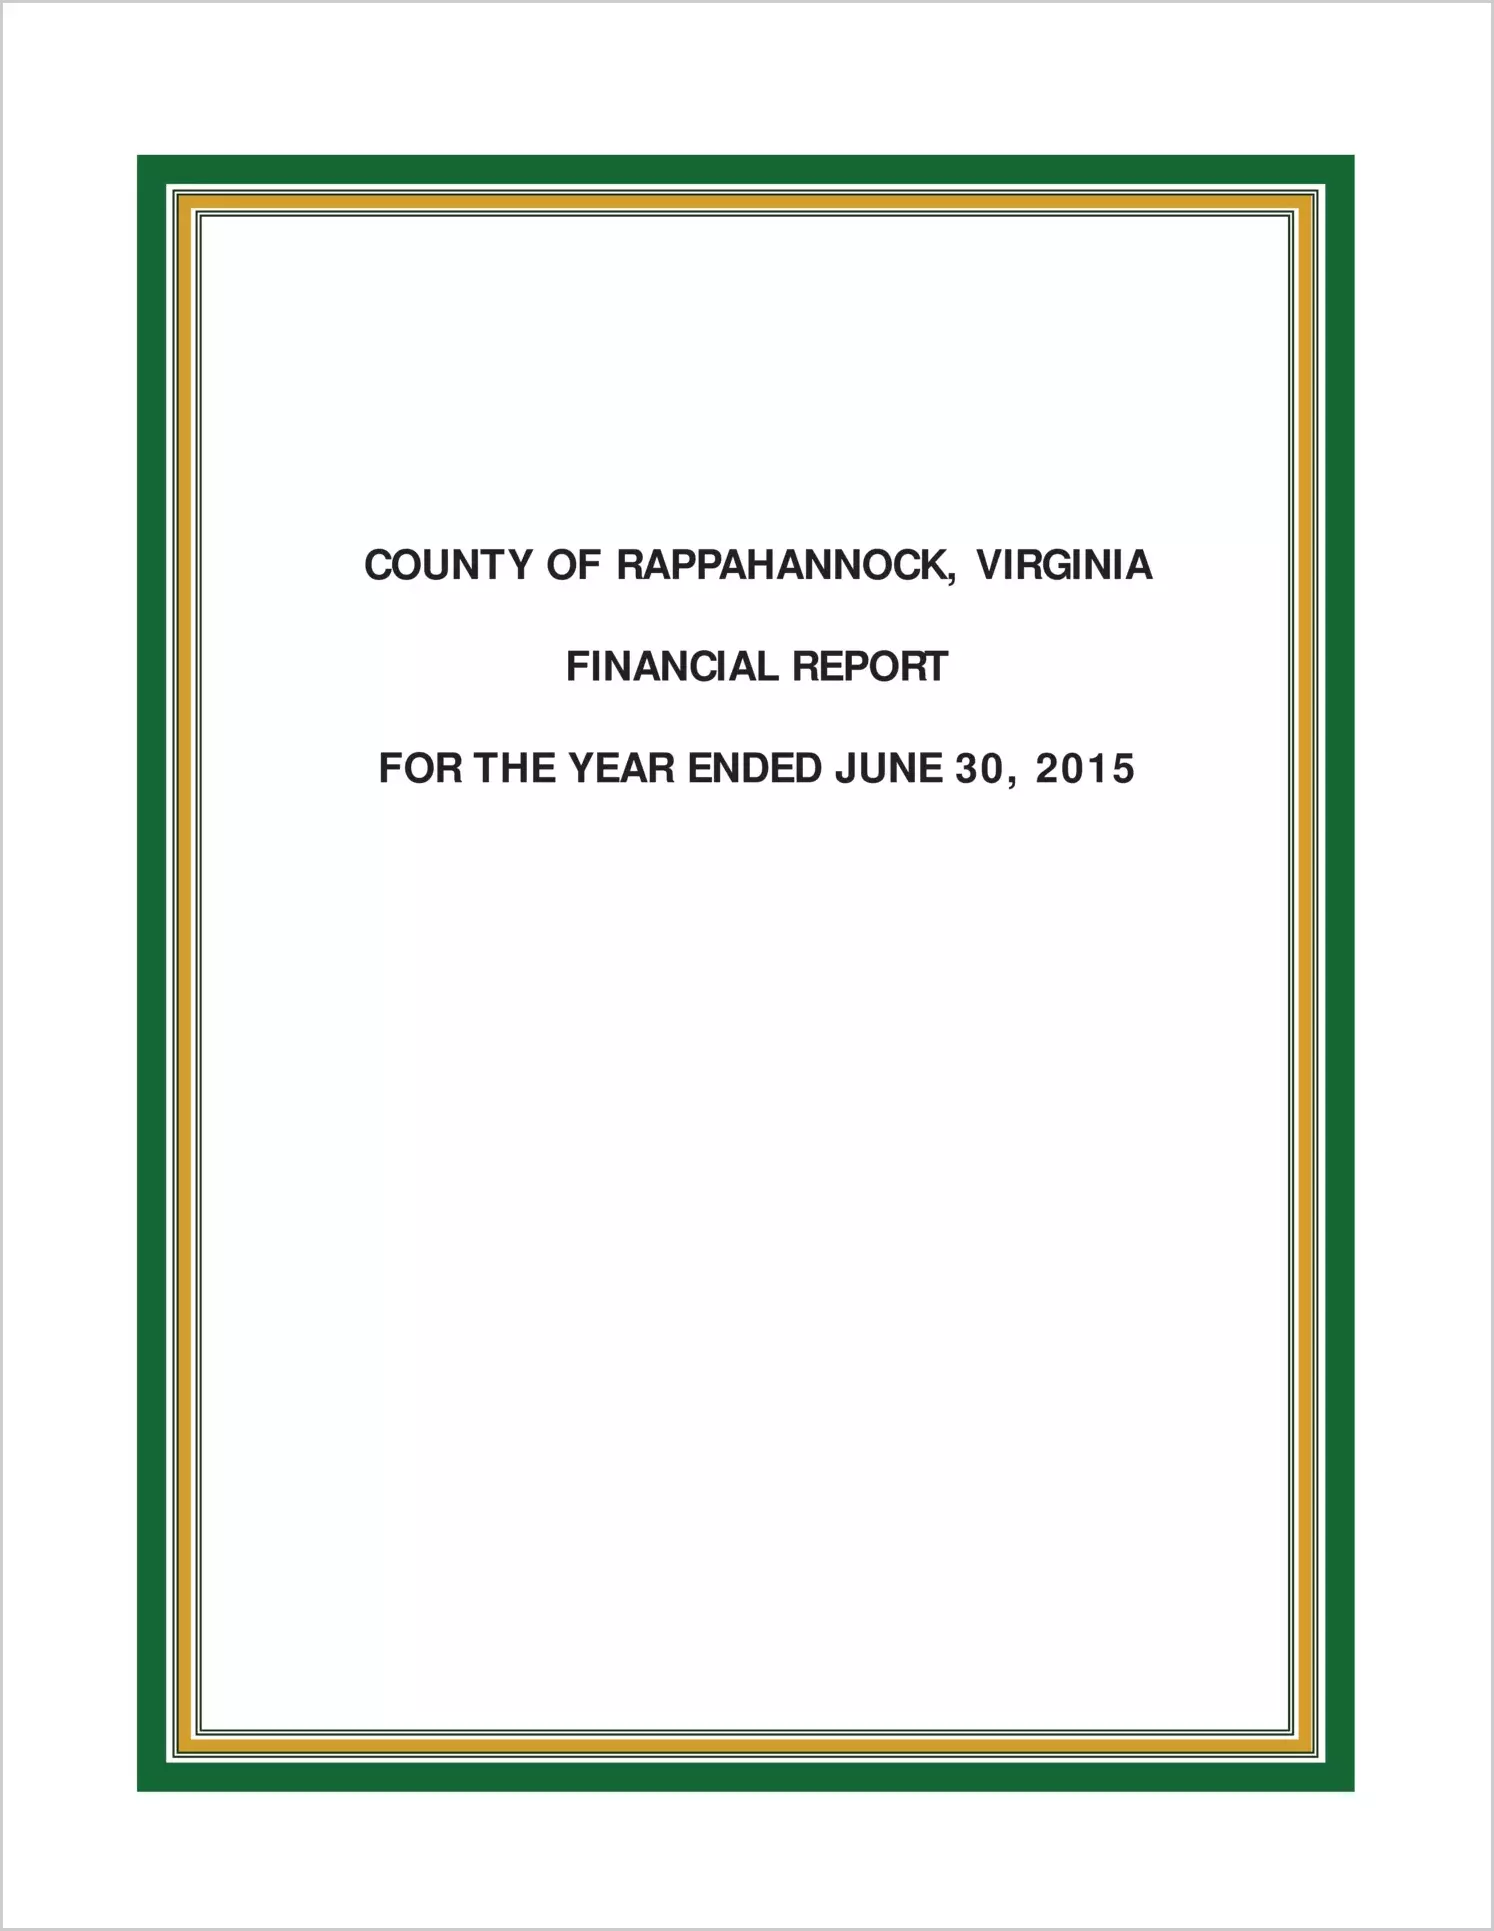 2015 Annual Financial Report for County of Rappahannock